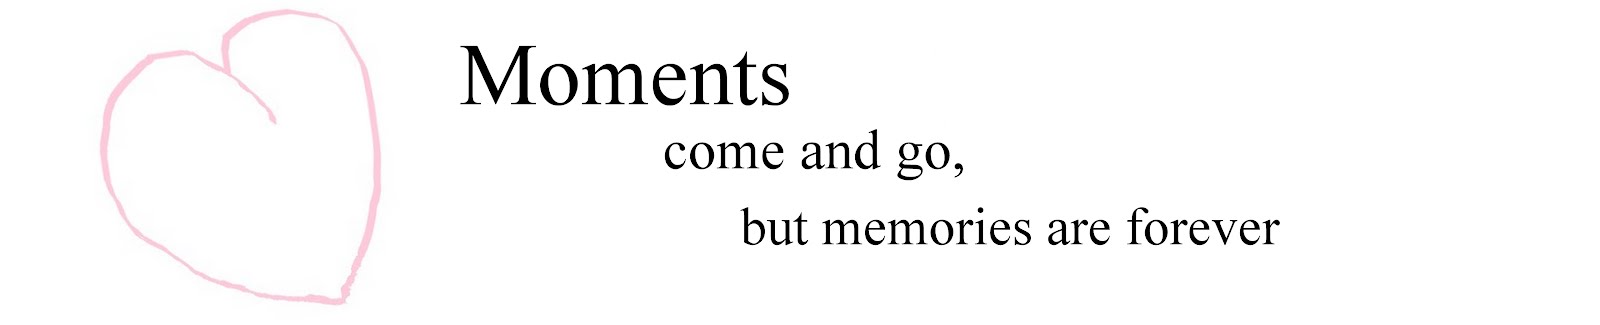 moments come and go, but memories are forever